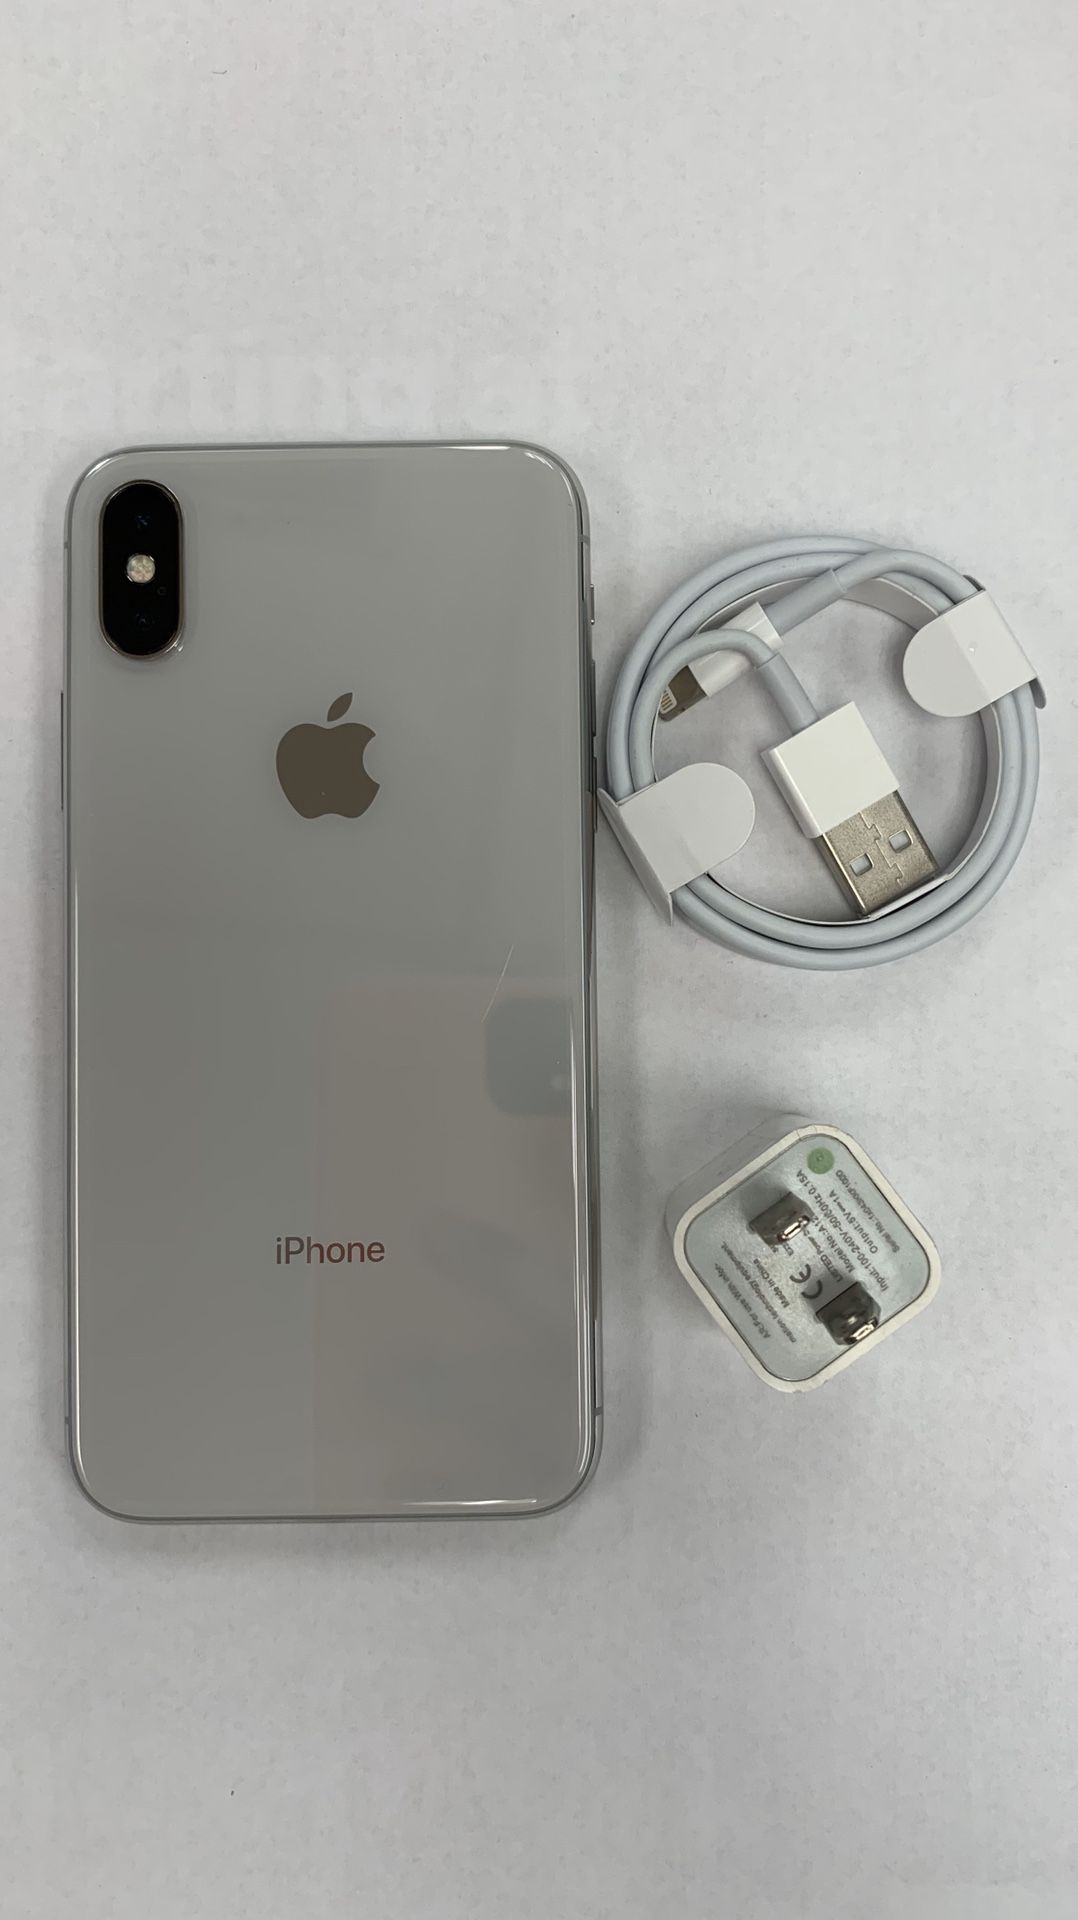 Factory Unlocked Iphone X 64GB. Excellent Condition.